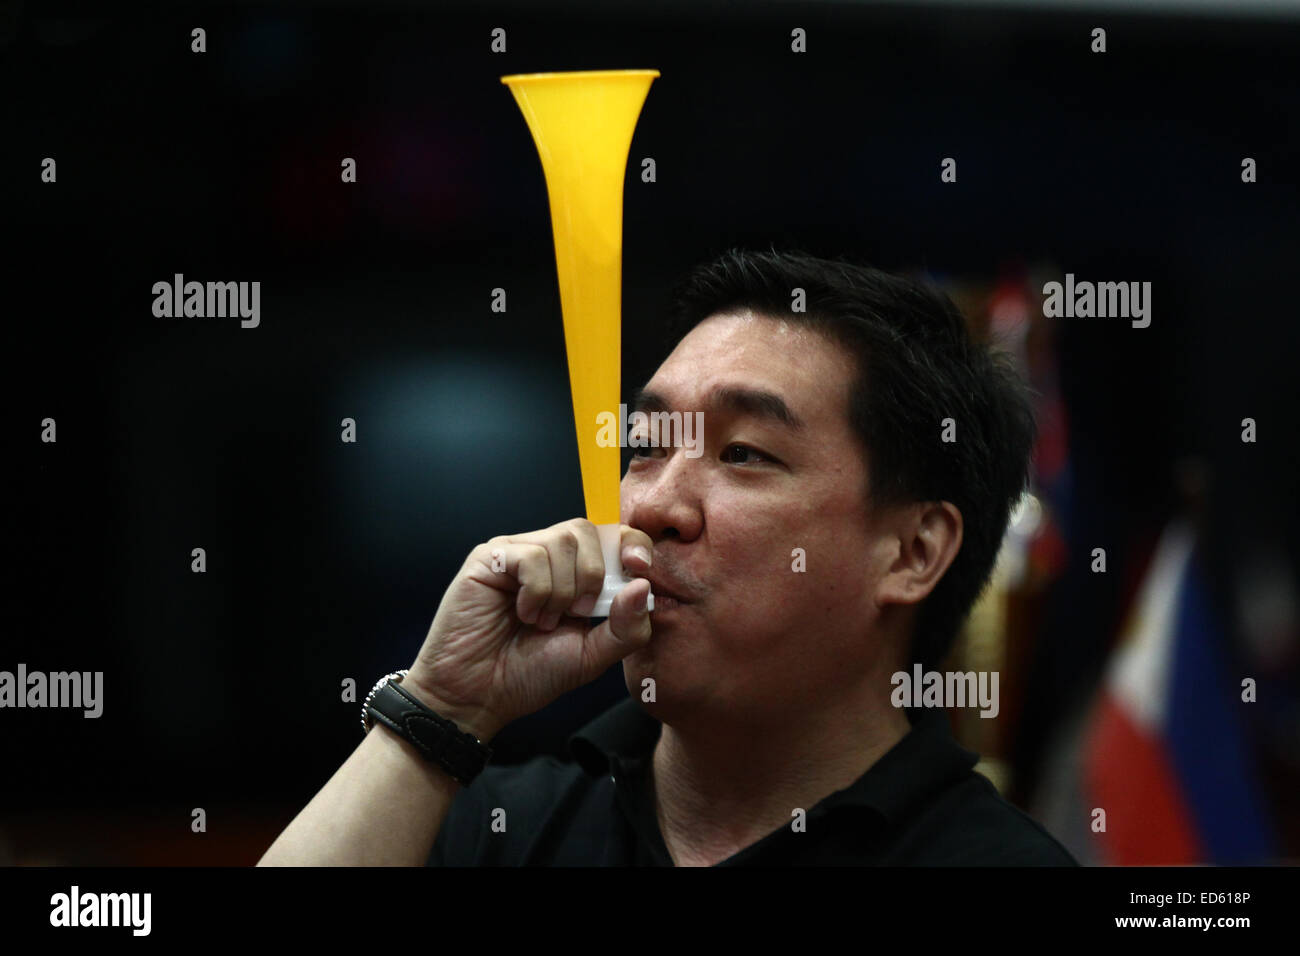 (141229) -- MAKATI CITY, Dec. 29, 2014 (Xinhua) -- A trader blows a toy trumpet during the last trading day of 2014 at the Philippine Stock Exchange in Makati City, the Philippines, Dec. 29, 2014. Philippine stock index rose 0.62 percent on its last trading day for the year. It ended the year at a two-week high of 7,230.57, rising 22.8 percent in 2014, among the region's outperformers.(Xinhua/Rouelle Umali)(zhf) Stock Photo